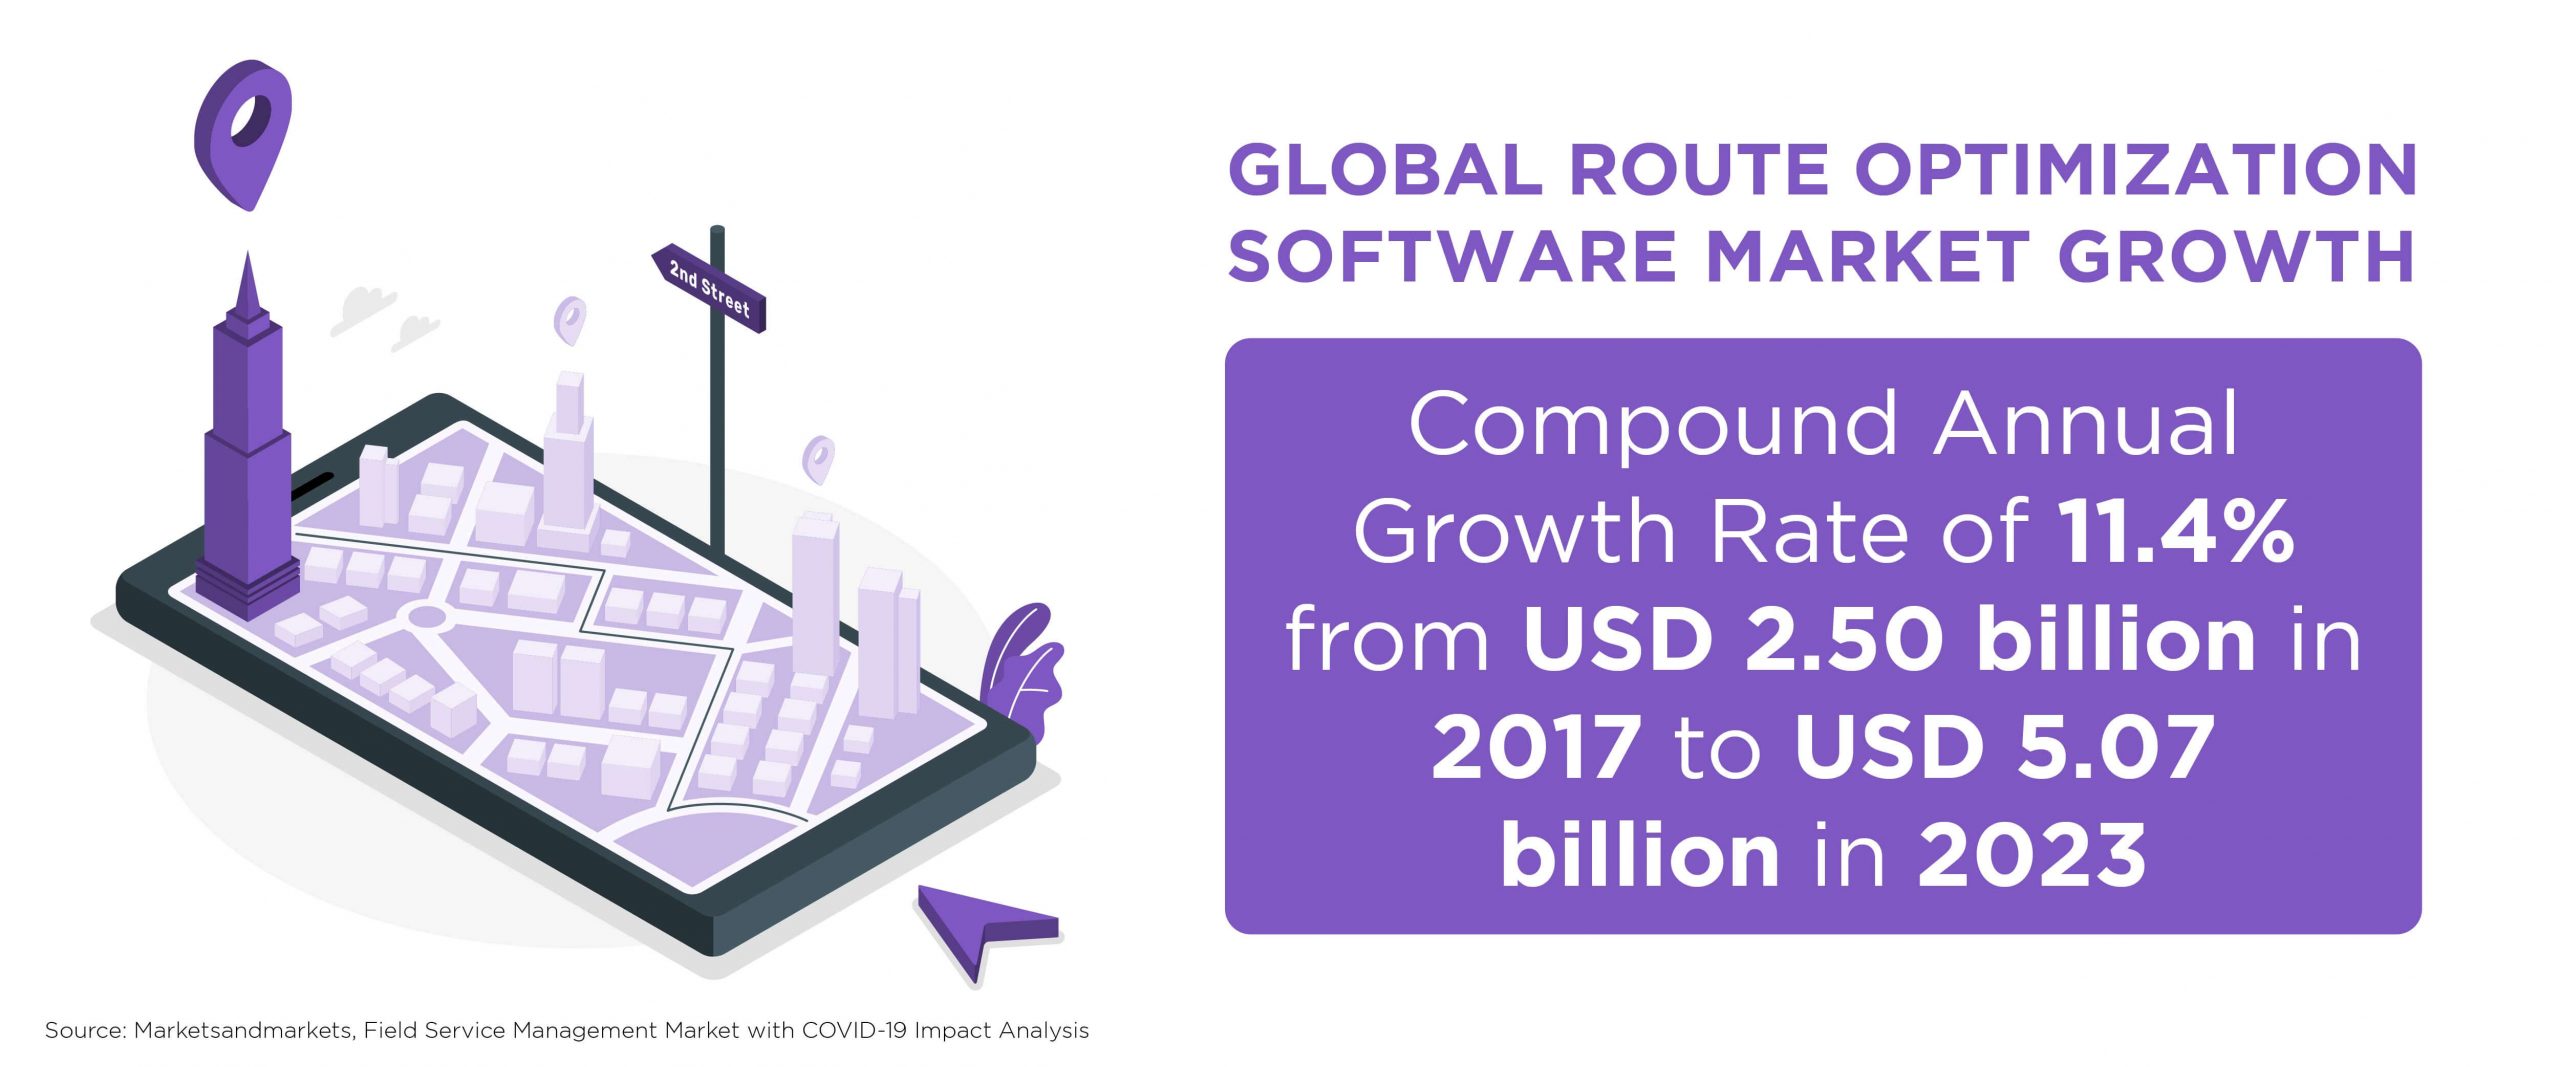 Global Route Optimization Software